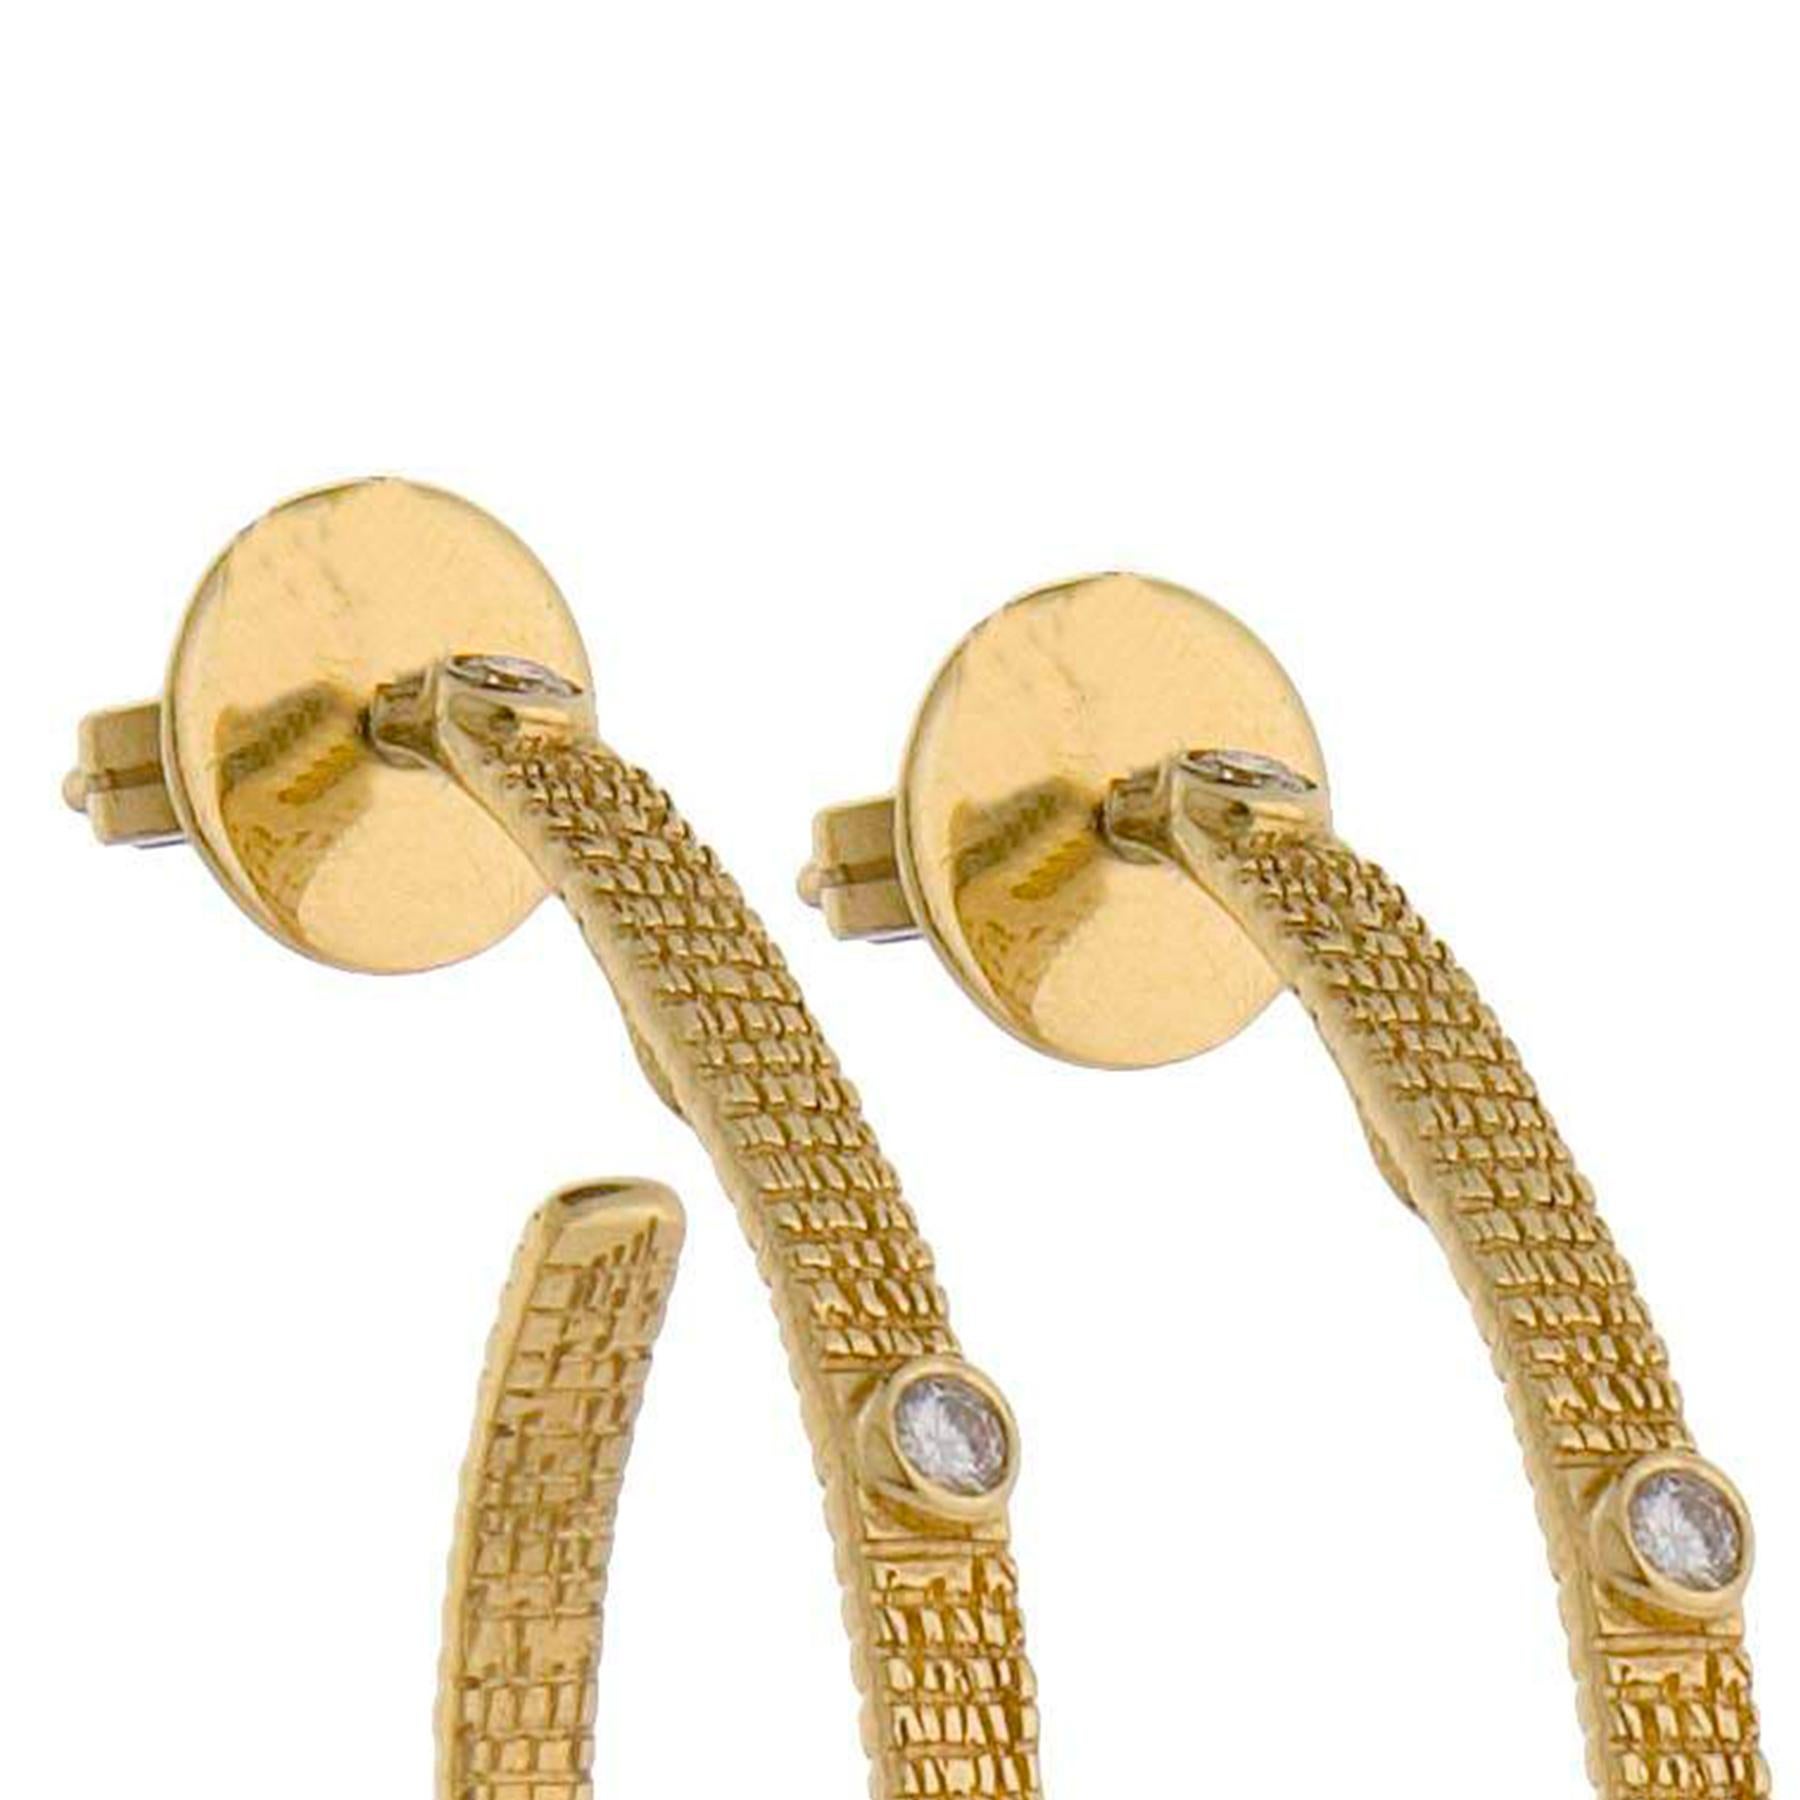 Hoop Earrings Set in 20 Karat Yellow Gold with Hammered Wire Gold Texture and 0.52-carat Rose-Cut Diamonds. This is part of COOMI's Eternity Collection which is inspired by the flow of movement of different shapes such as circles, wire, coils, and